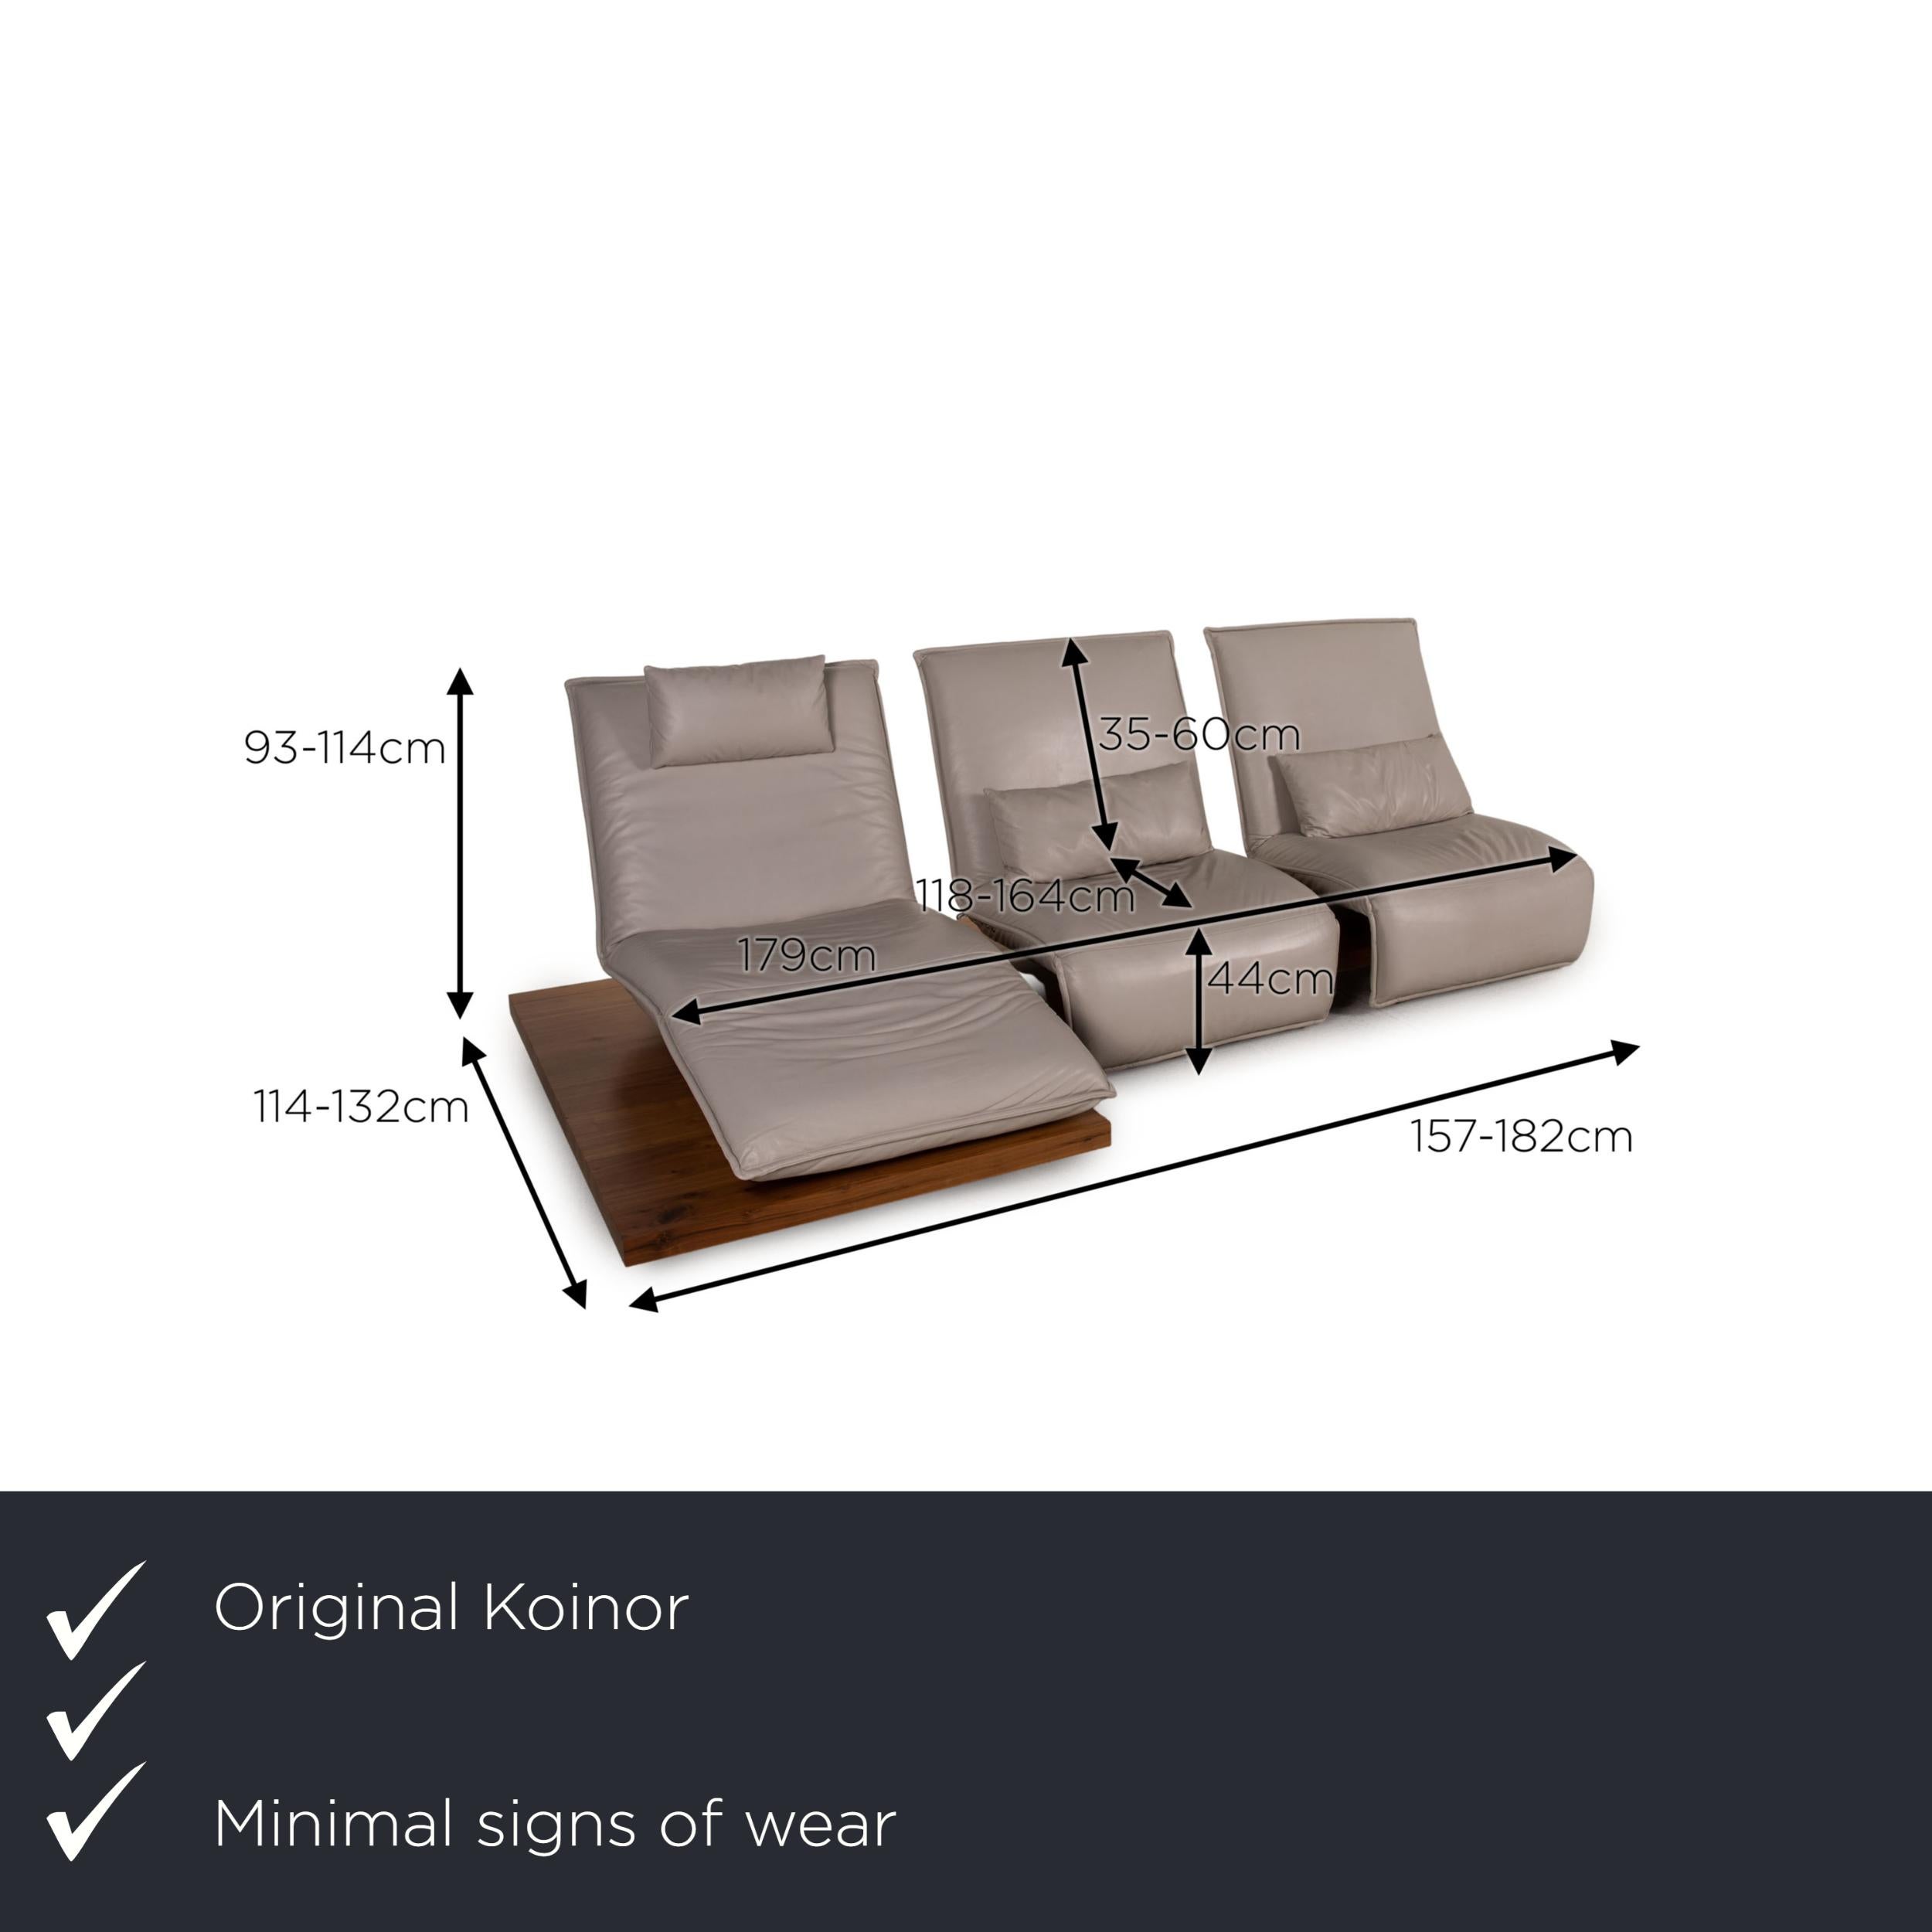 We present to you a Koinor free motion edit leather sofa cream corner sofa function relax function.

 
Product measurements in centimeters:
 

Depth: 114
Width: 157
Height: 114
Seat height: 44
Seat depth: 118
Seat width: 179
Back height: